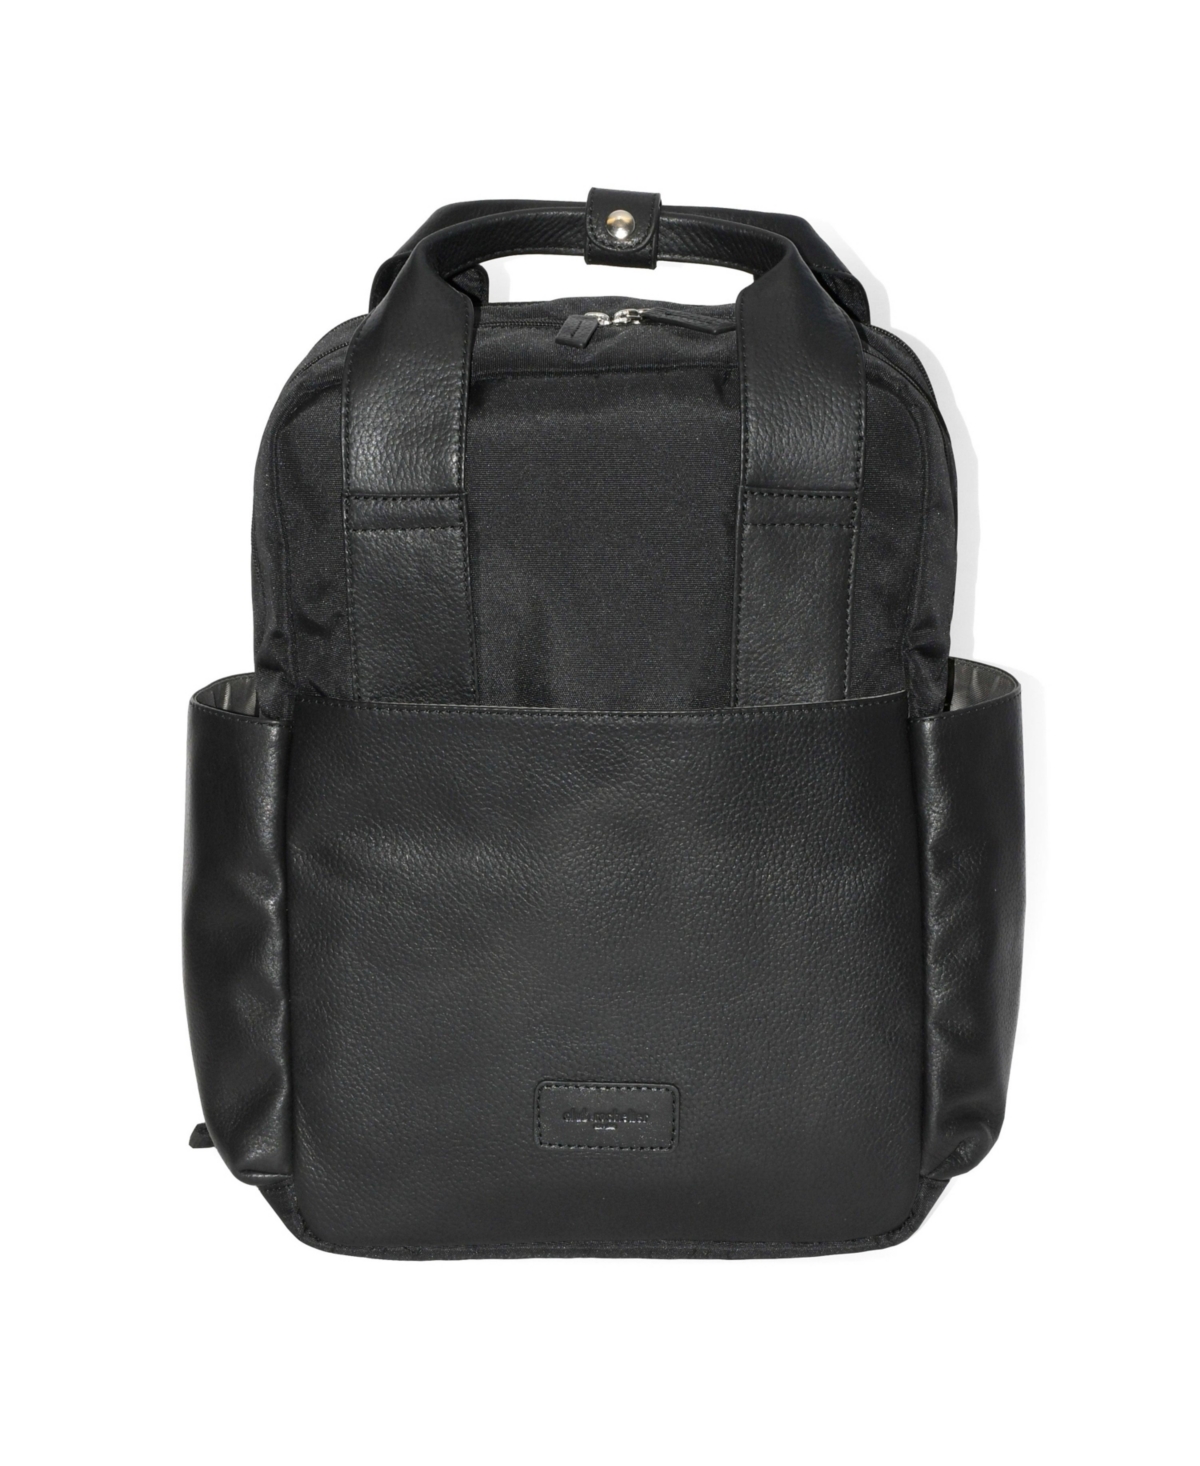 Leather Backpack with Double Handles and Multi Pockets - Black